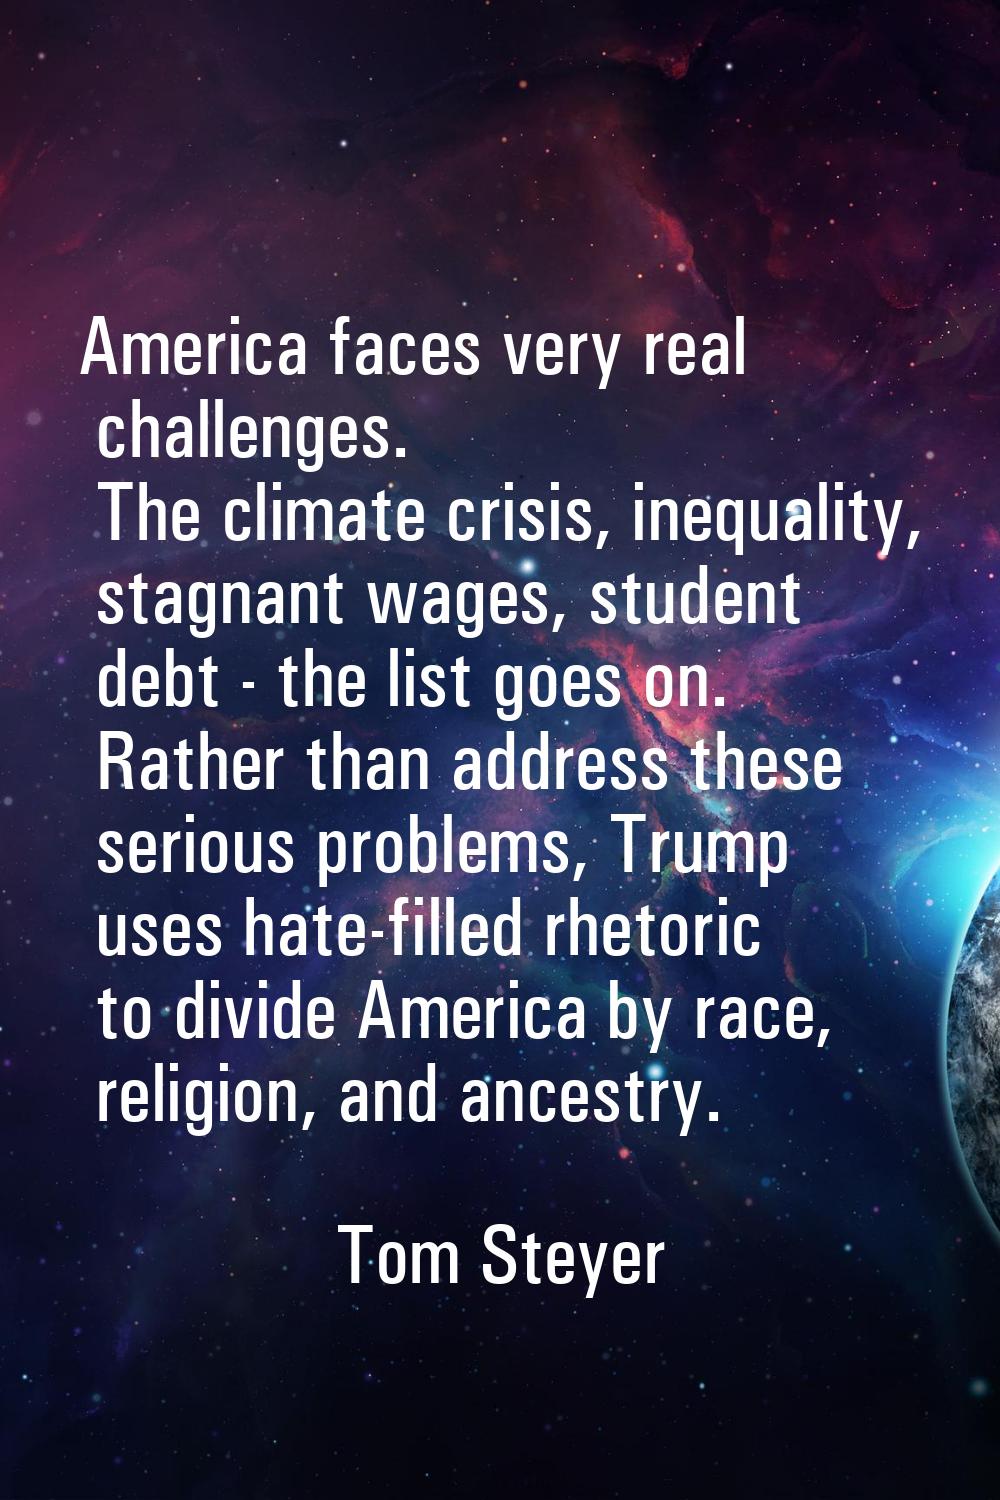 America faces very real challenges. The climate crisis, inequality, stagnant wages, student debt - 